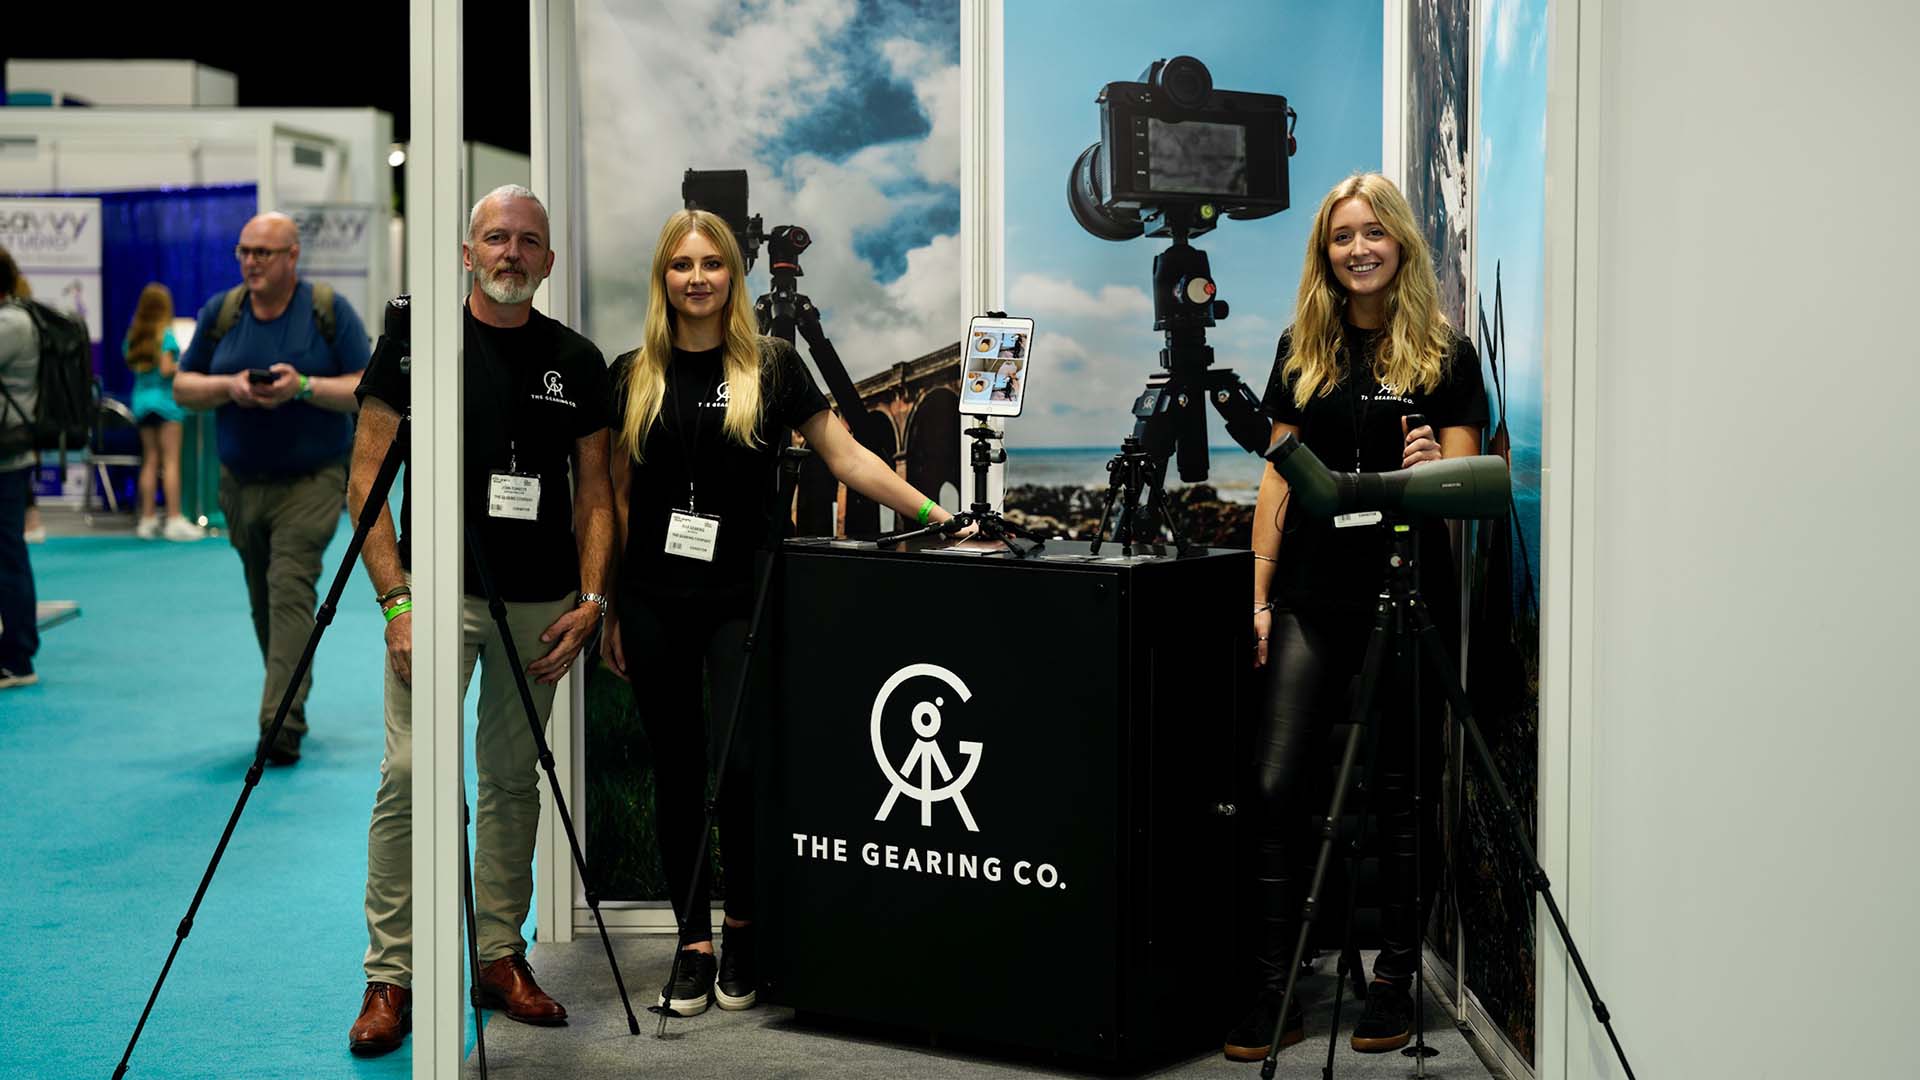 Exhibiting with Gearing - The Big Picture (or Photo)